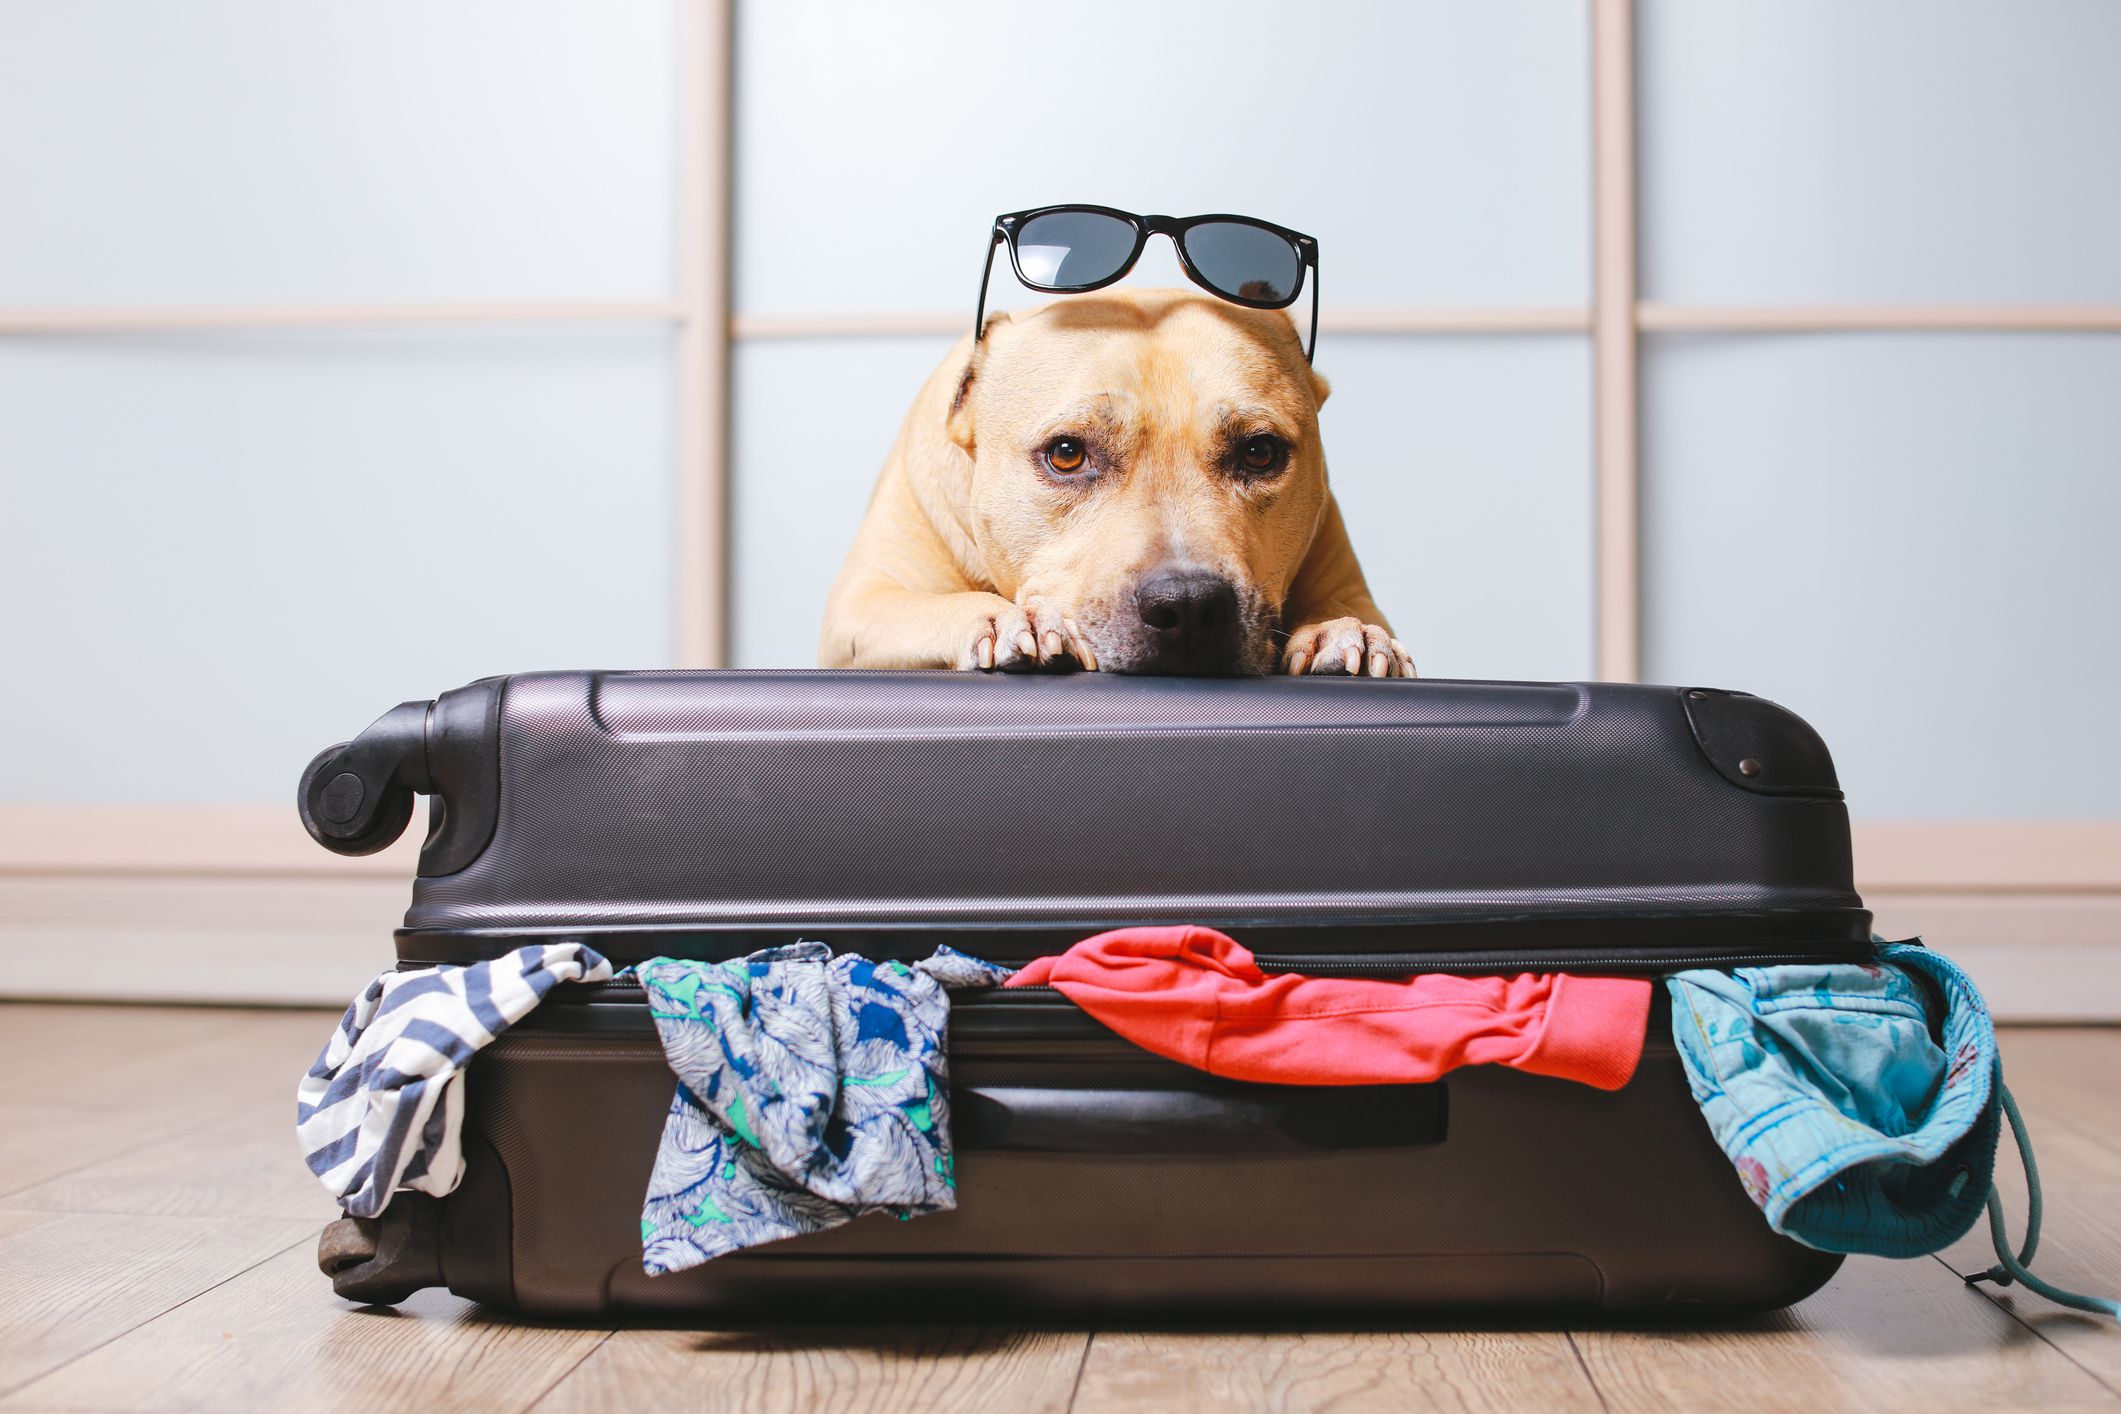 <p>Traveling with a beloved pet can be fun if you’ve got the budgeting basics and tips you need to make sure the trip is successful. While it can be more costly, with proper planning, bringing your furry friend along doesn’t have to be outrageously expensive.</p><p><b>Learn More:</b></p><ul><li><b><a href="https://www.sofi.com/personal-loan-calculator/">Personal loan calculator</a></b></li><li><b><a href="https://www.sofi.com/learn/content/can-i-pay-off-a-personal-loan-early/">Can I pay off a personal loan early?</a></b></li></ul><p><i>This article originally appeared on <a href="https://www.sofi.com/learn/content/tips-save-money-traveling-with-pets/">SoFi.com</a> and was syndicated by<a href="https://mediafeed.org/"> MediaFeed.org</a>.</i></p><p><i><strong>External Websites:</strong> The information and analysis provided through hyperlinks to third-party websites, while believed to be accurate, cannot be guaranteed by SoFi. Links are provided for informational purposes and should not be viewed as an endorsement.<strong>Third-Party Brand Mentions:</strong> No brands or products mentioned are affiliated with SoFi, nor do they endorse or sponsor this article. Third-party trademarks referenced herein are property of their respective owners.<strong>Financial Tips & Strategies:</strong> The tips provided on this website are of a general nature and do not take into account your specific objectives, financial situation, and needs. You should always consider their appropriateness given your own circumstances.SoFi Checking and Savings is offered through SoFi Bank, N.A. ©2022 SoFi Bank, N.A. All rights reserved. Member FDIC. Equal Housing Lender.SoFi members with direct deposit can earn up to 1.25% annual percentage yield (APY) interest on all account balances in their Checking and Savings accounts (including Vaults). Members without direct deposit will earn 0.70% APY on all account balances in their Checking and Savings accounts (including Vaults). Interest rates are variable and subject to change at any time. Rate of 1.25% APY is current as of 4/5/2022. Additional information can be found at <a href="https://www.sofi.com/legal/banking-rate-sheet">http://www.sofi.com/legal/banking-rate-sheet</a></i></p>